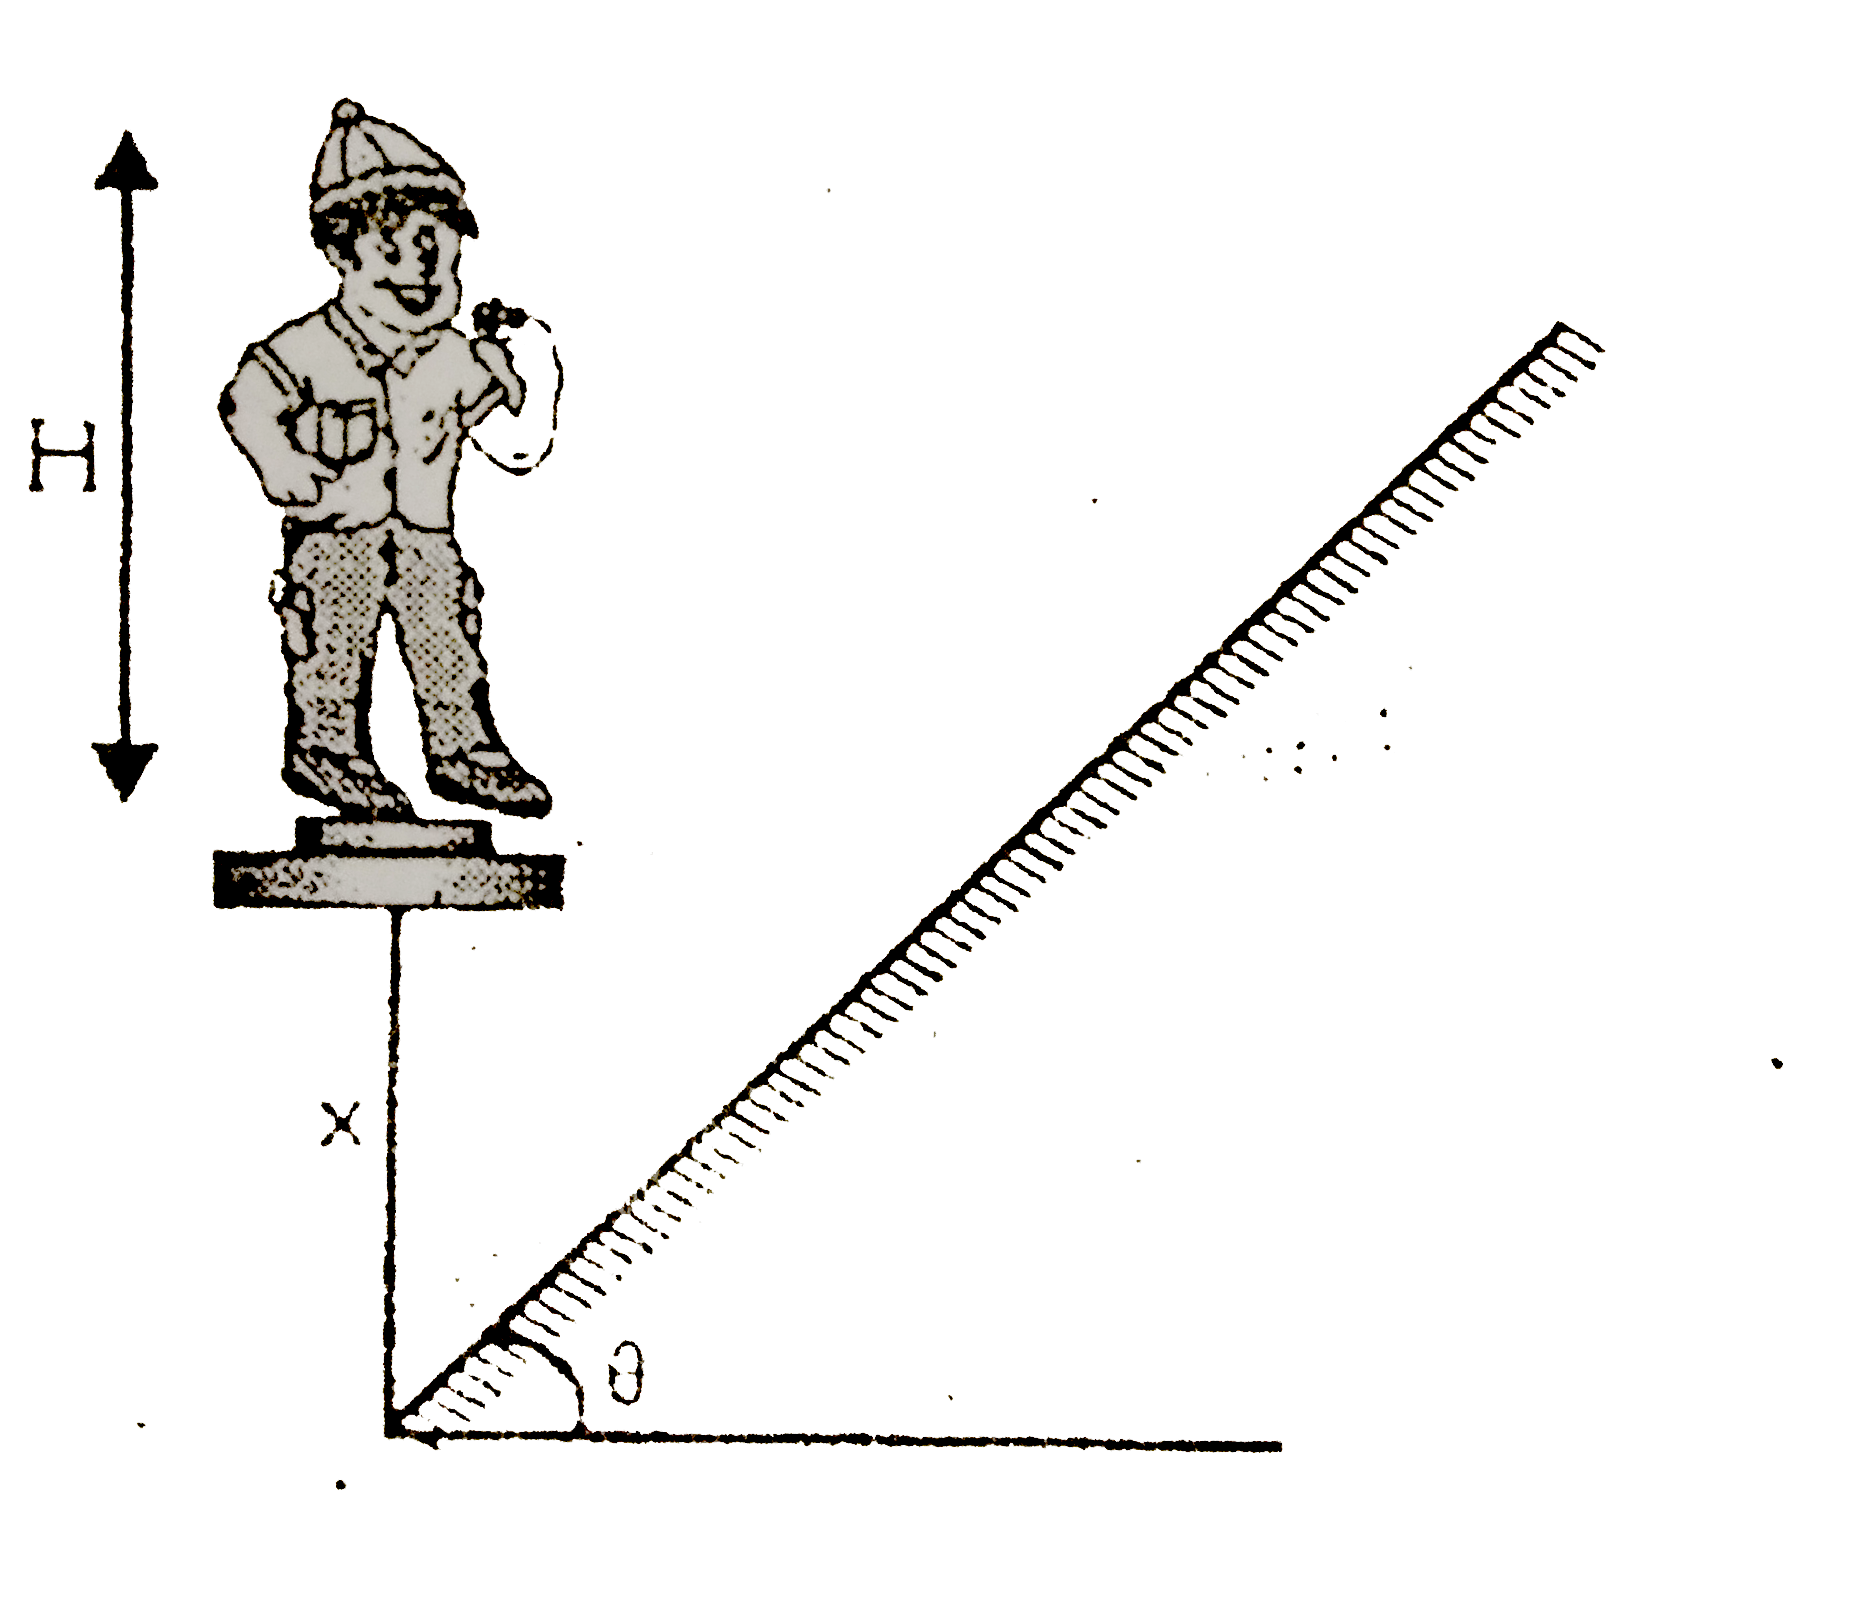 A  man of height H is standing in front of an inclined plane mirror at an angle theta from horizontal. The vertical separation between man and inclined plane is x. Man  can see its complete image in length (H(H+x)